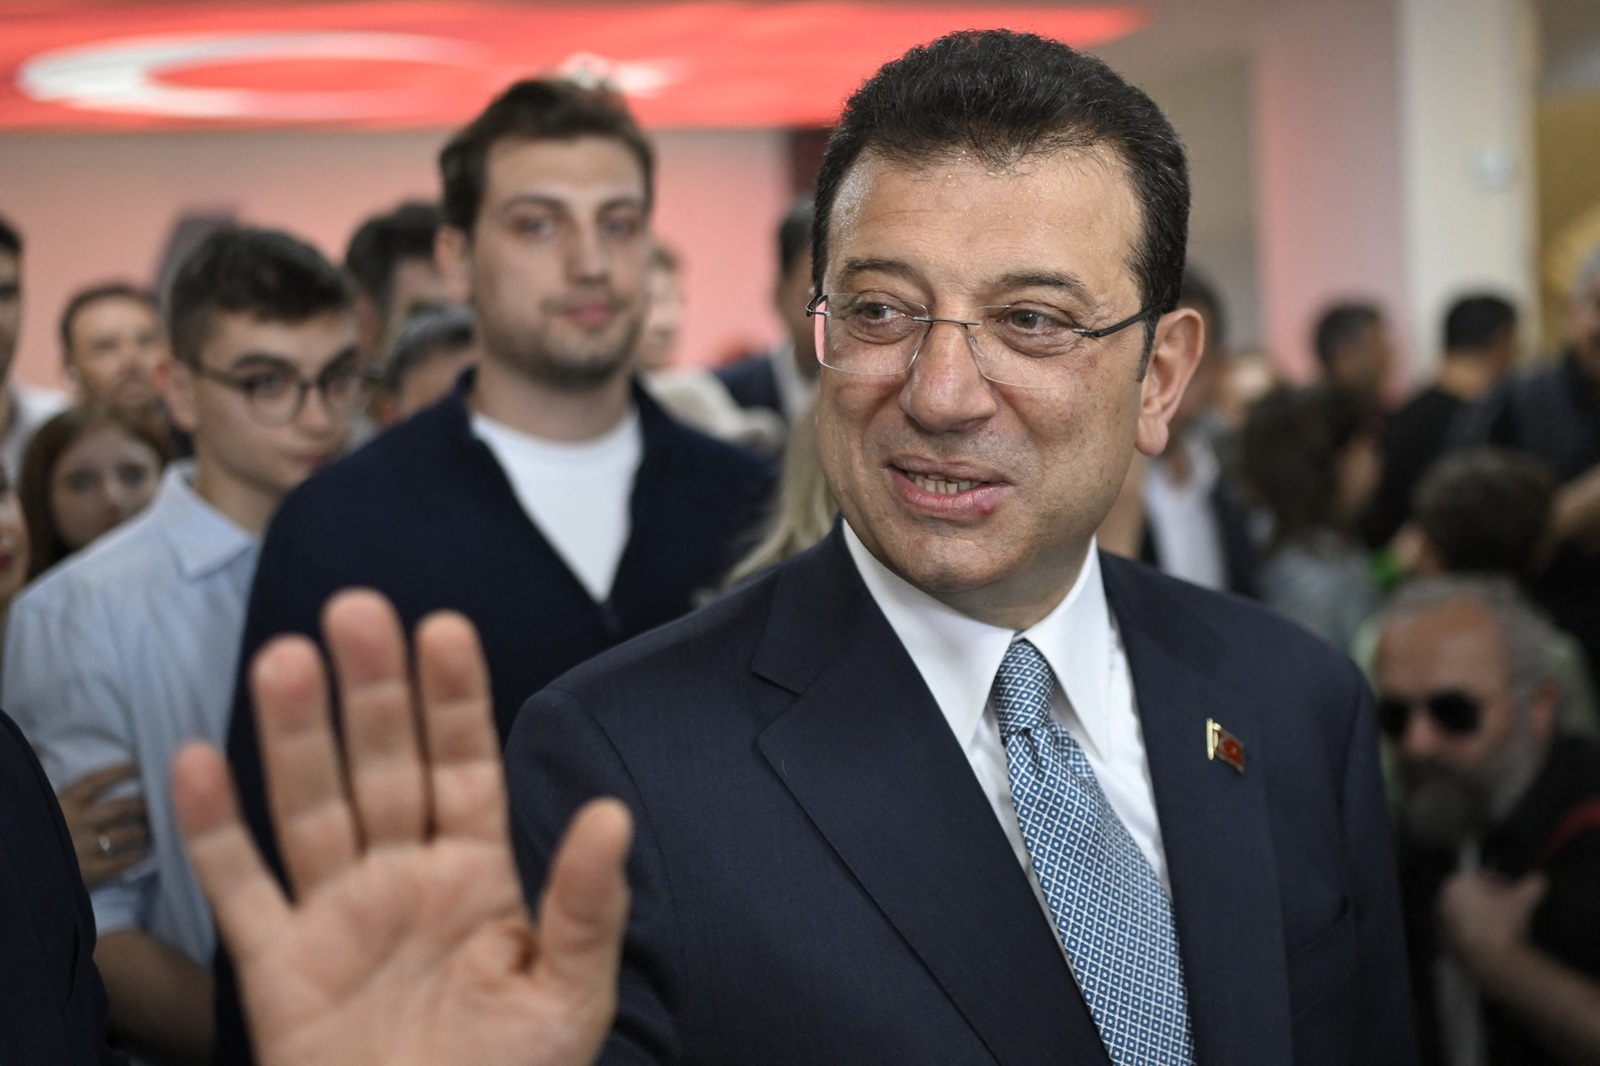 Incumbent Istanbul's mayor and mayoral candidate Ekrem Imamoglu (C) arrives at the polling station to vote for the municipal elections, in Istanbul on March 31, 2024. Turkish citizens head to the polls on March 31, 2024, in local elections as the President sets his sights on winning back Istanbul, the country's economic powerhouse, after he was re-elected head of state in a tight contest last year. The latest elections come in the throes of an economic crisis that saw the inflation rate surge to 67.1 percent and the Turkish currency crumble against dollar.,Image: 861376965, License: Rights-managed, Restrictions: , Model Release: no, Credit line: YASIN AKGUL / AFP / Profimedia